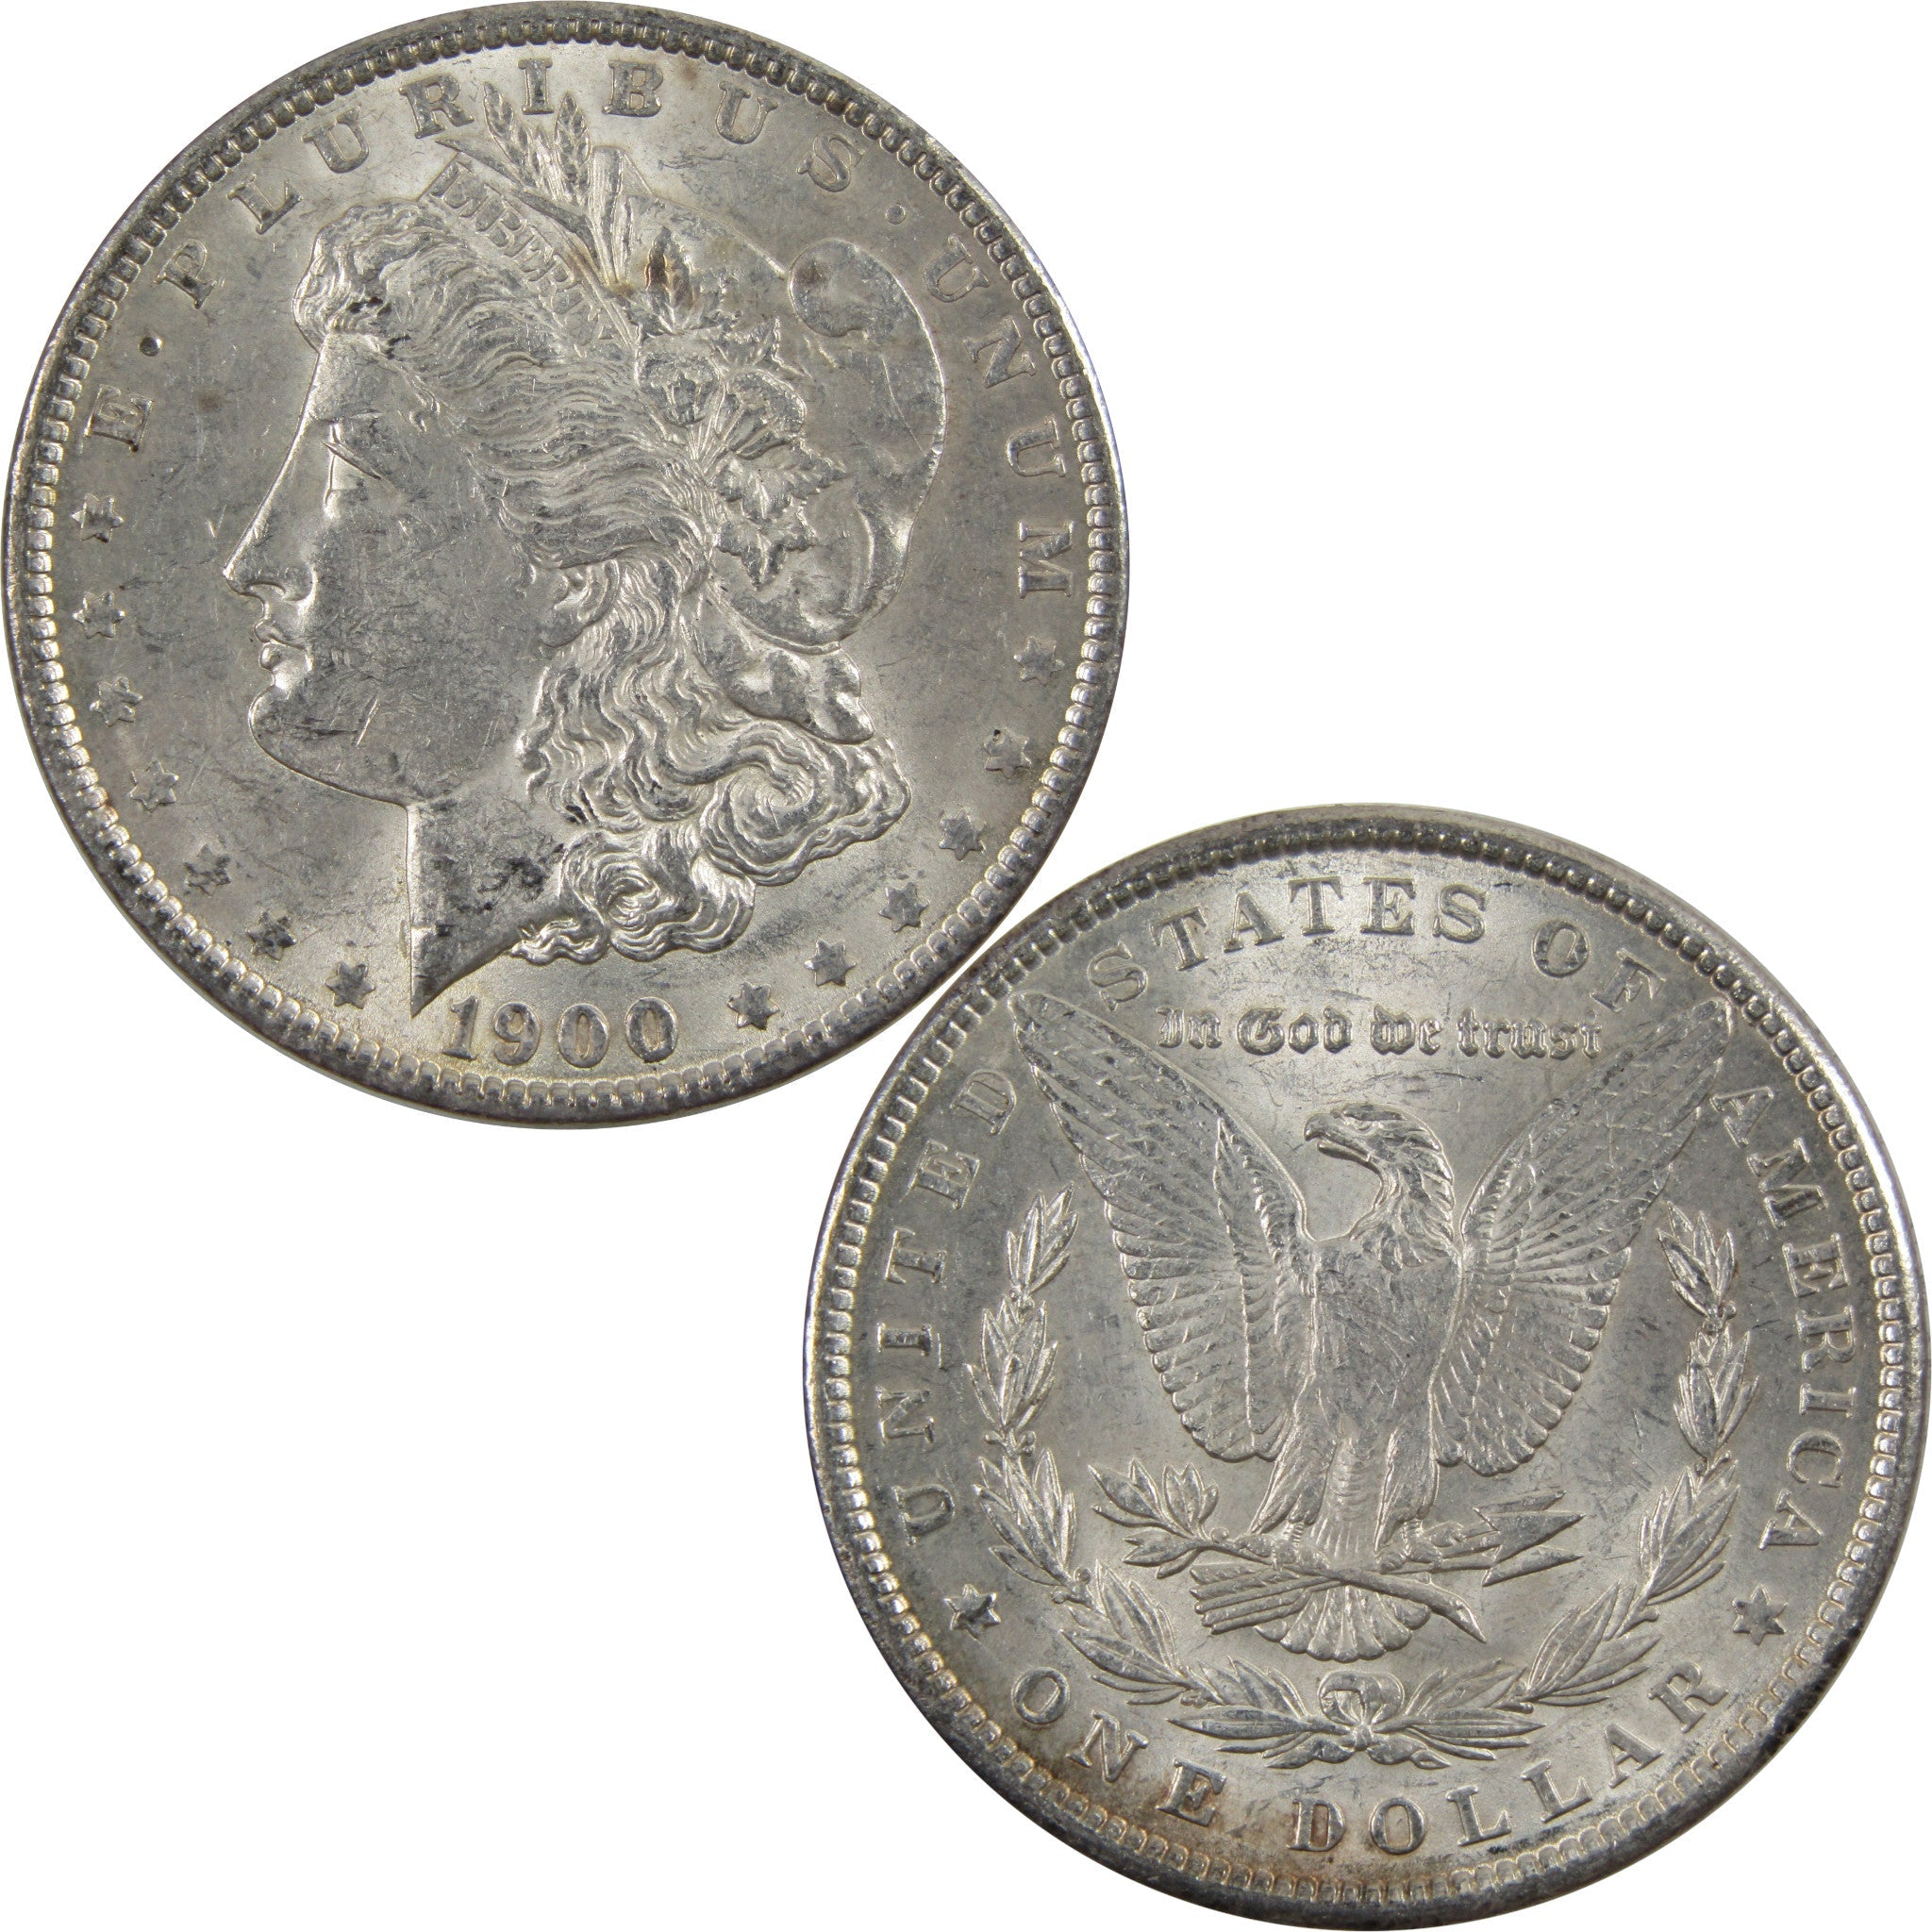 1900 Morgan Dollar AU About Uncirculated 90% Silver $1 Coin SKU:I5510 - Morgan coin - Morgan silver dollar - Morgan silver dollar for sale - Profile Coins &amp; Collectibles